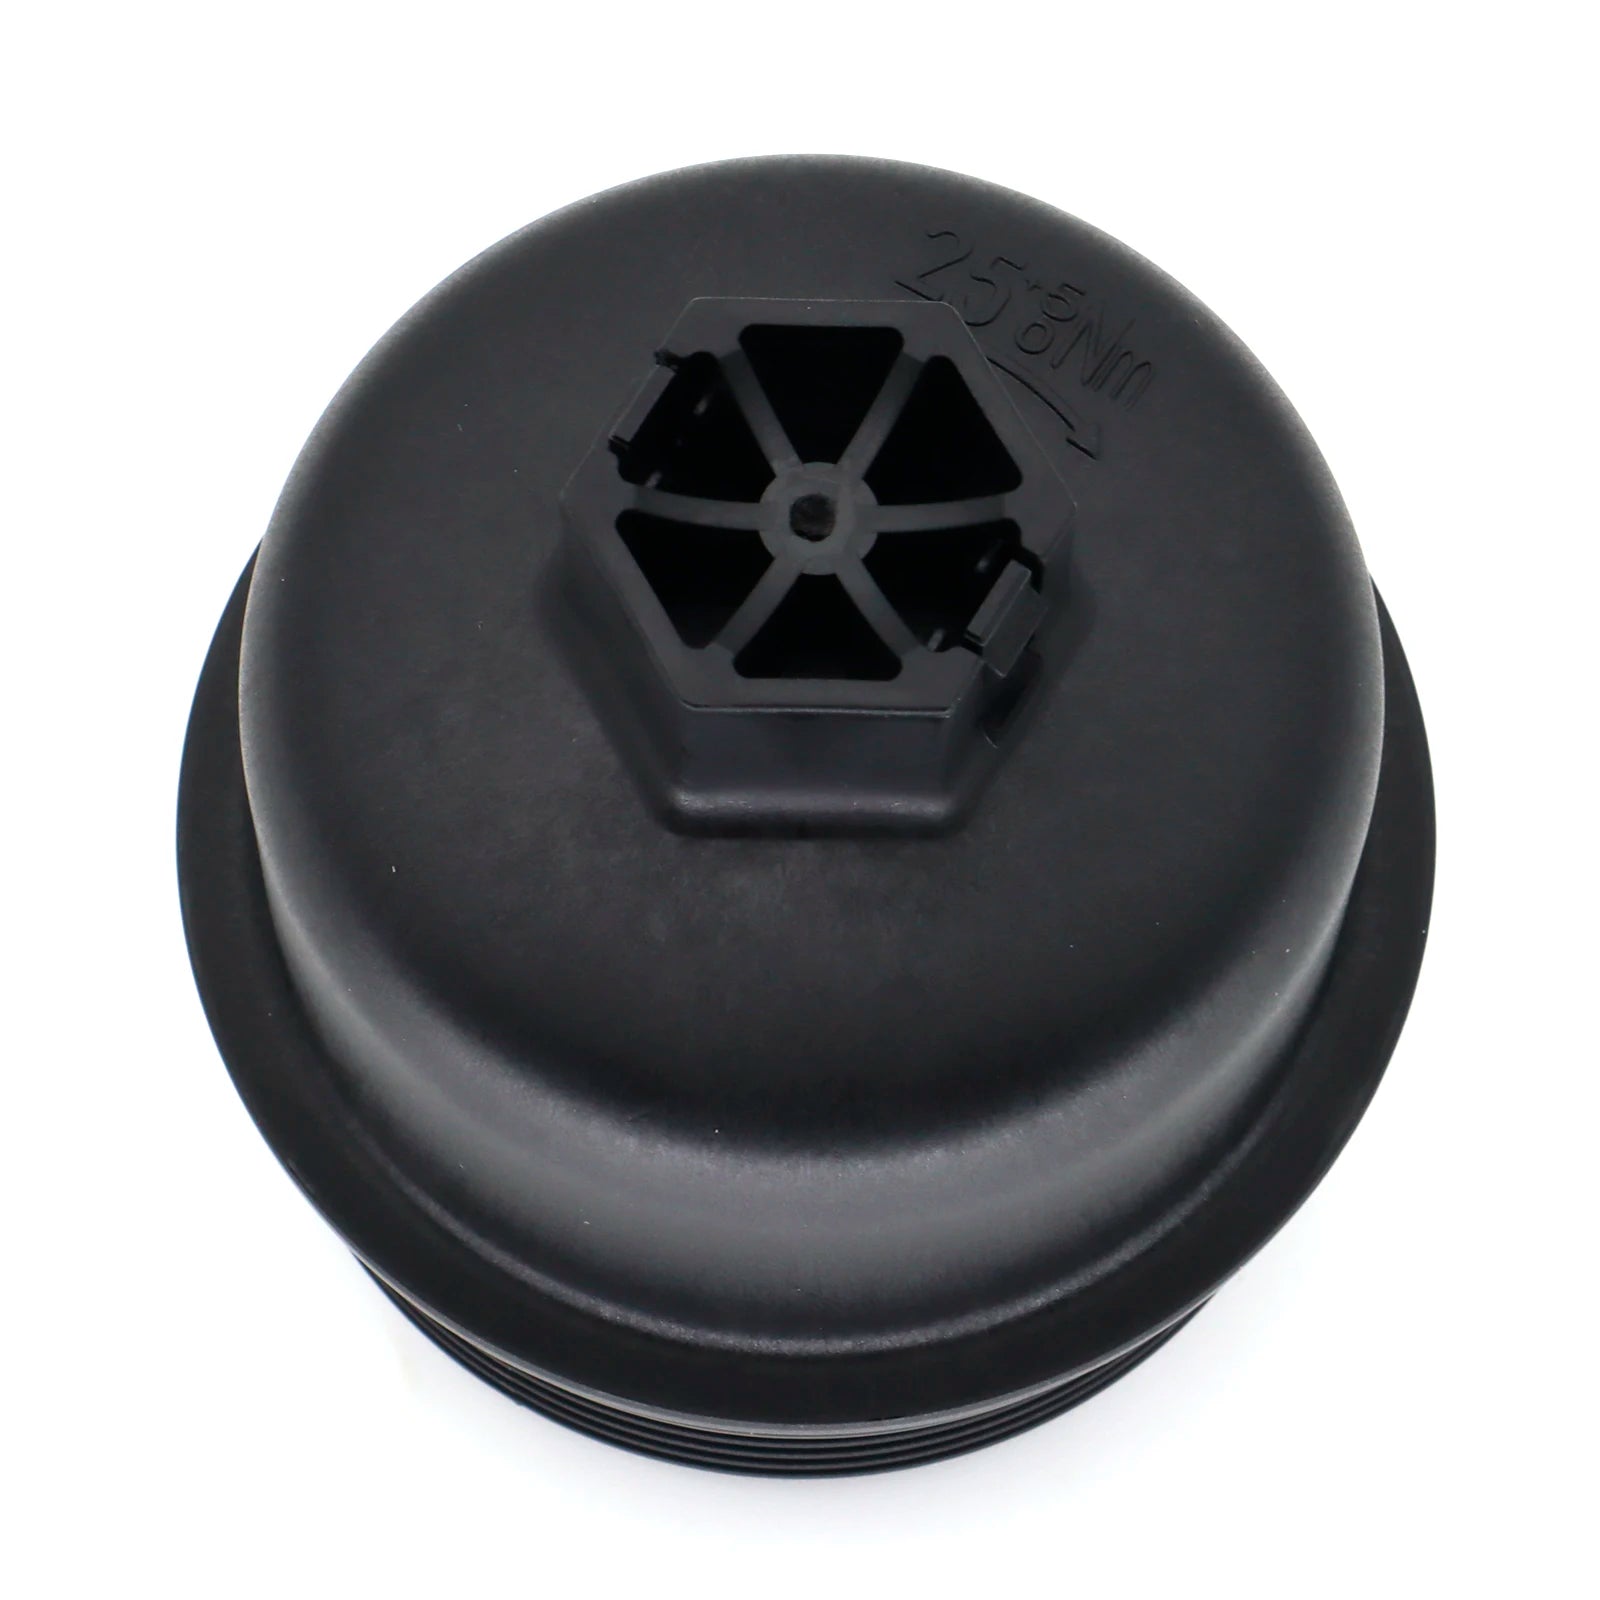 1303477 Engine Parts Oil Filter Housing Cover Cap For Citroën Ford Transit MK7 Mondeo Mk4 2006 2007 2008 2009 2010 2011 2012-16